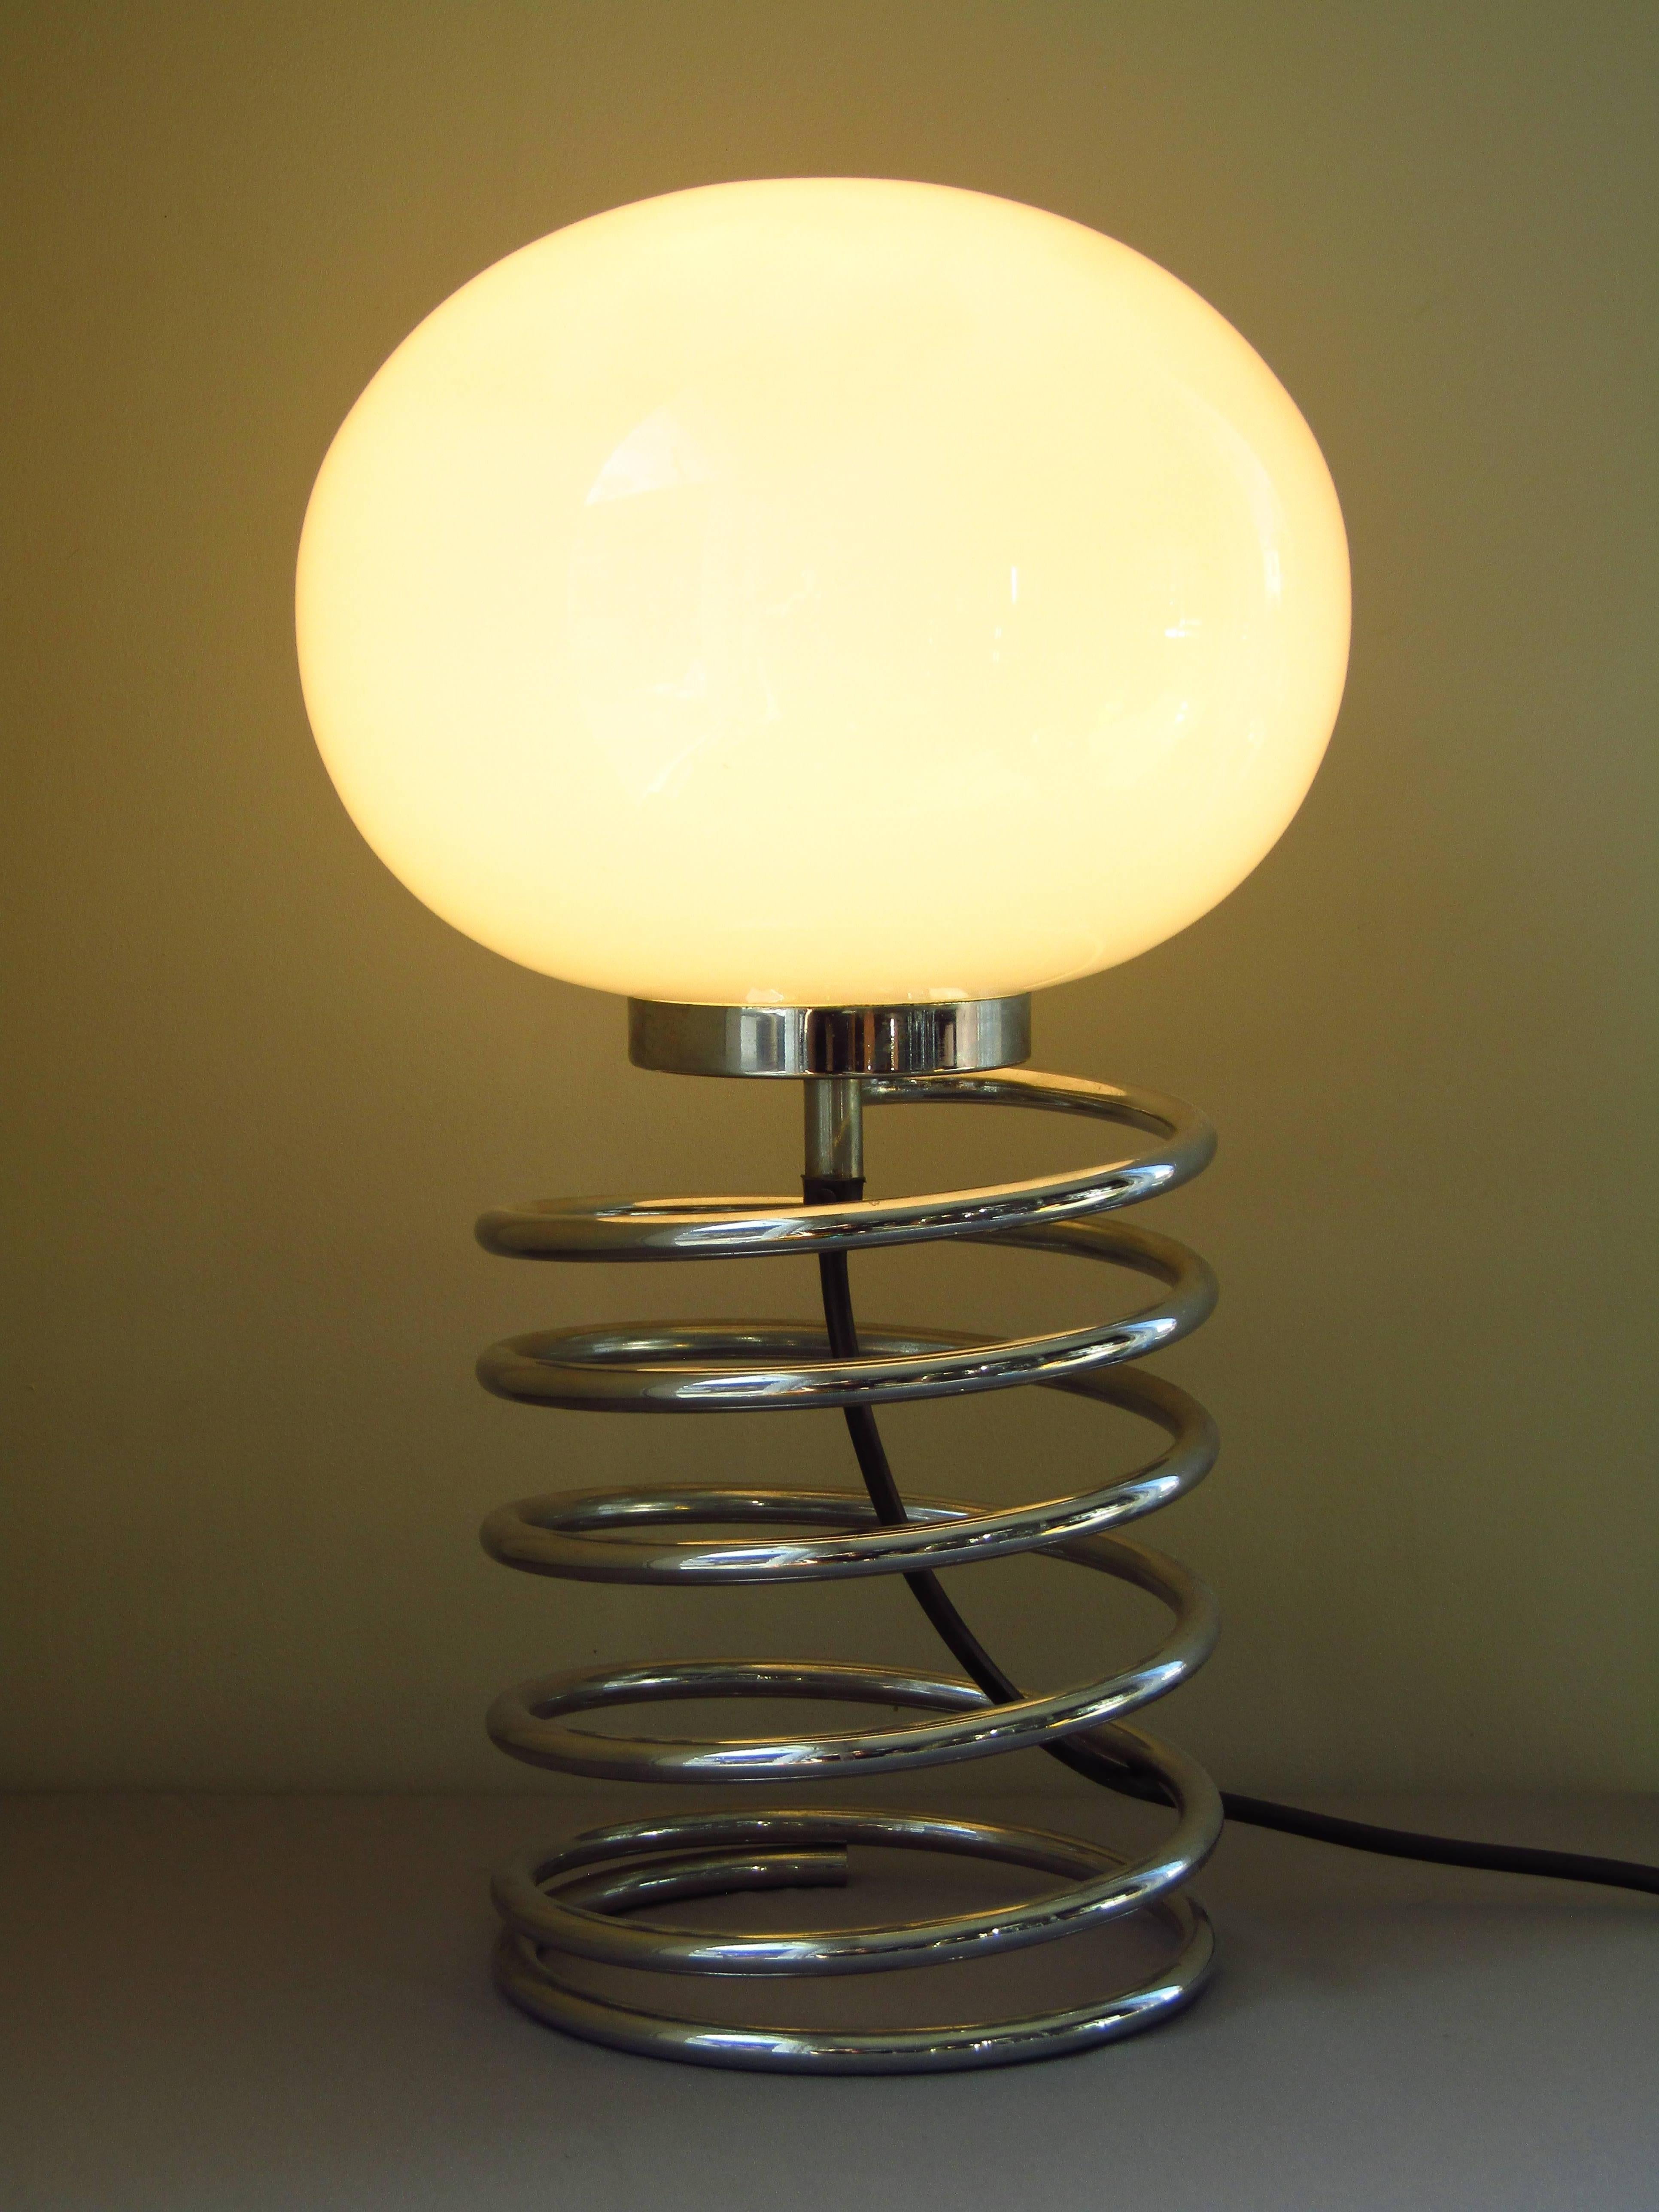 Table lamp Spirale, designed circa 1965 by Ingo Maurer for Design M. was built in two different sizes, this is the large. Have a look for the small one also available in my shop.
Chrome metal base, opaline glass shade.

 